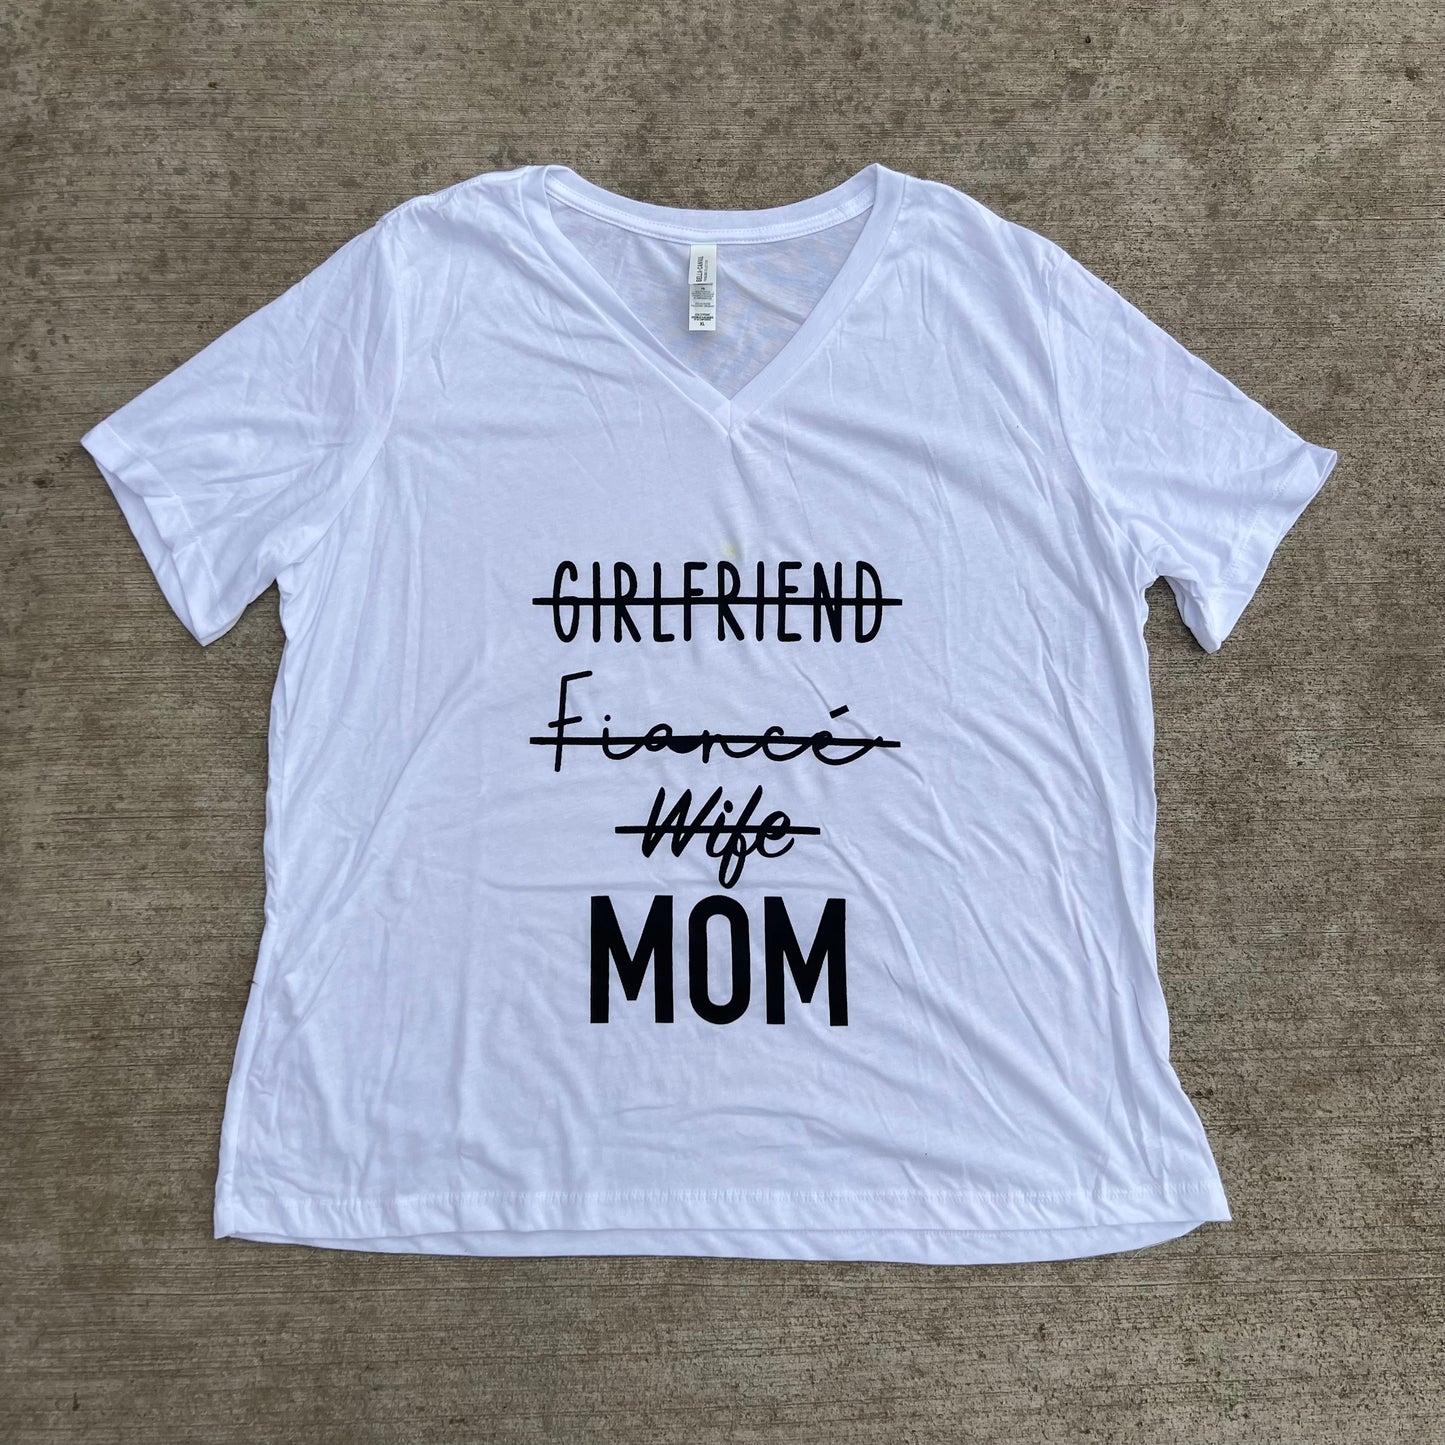 From Girlfriend to Mom Tee